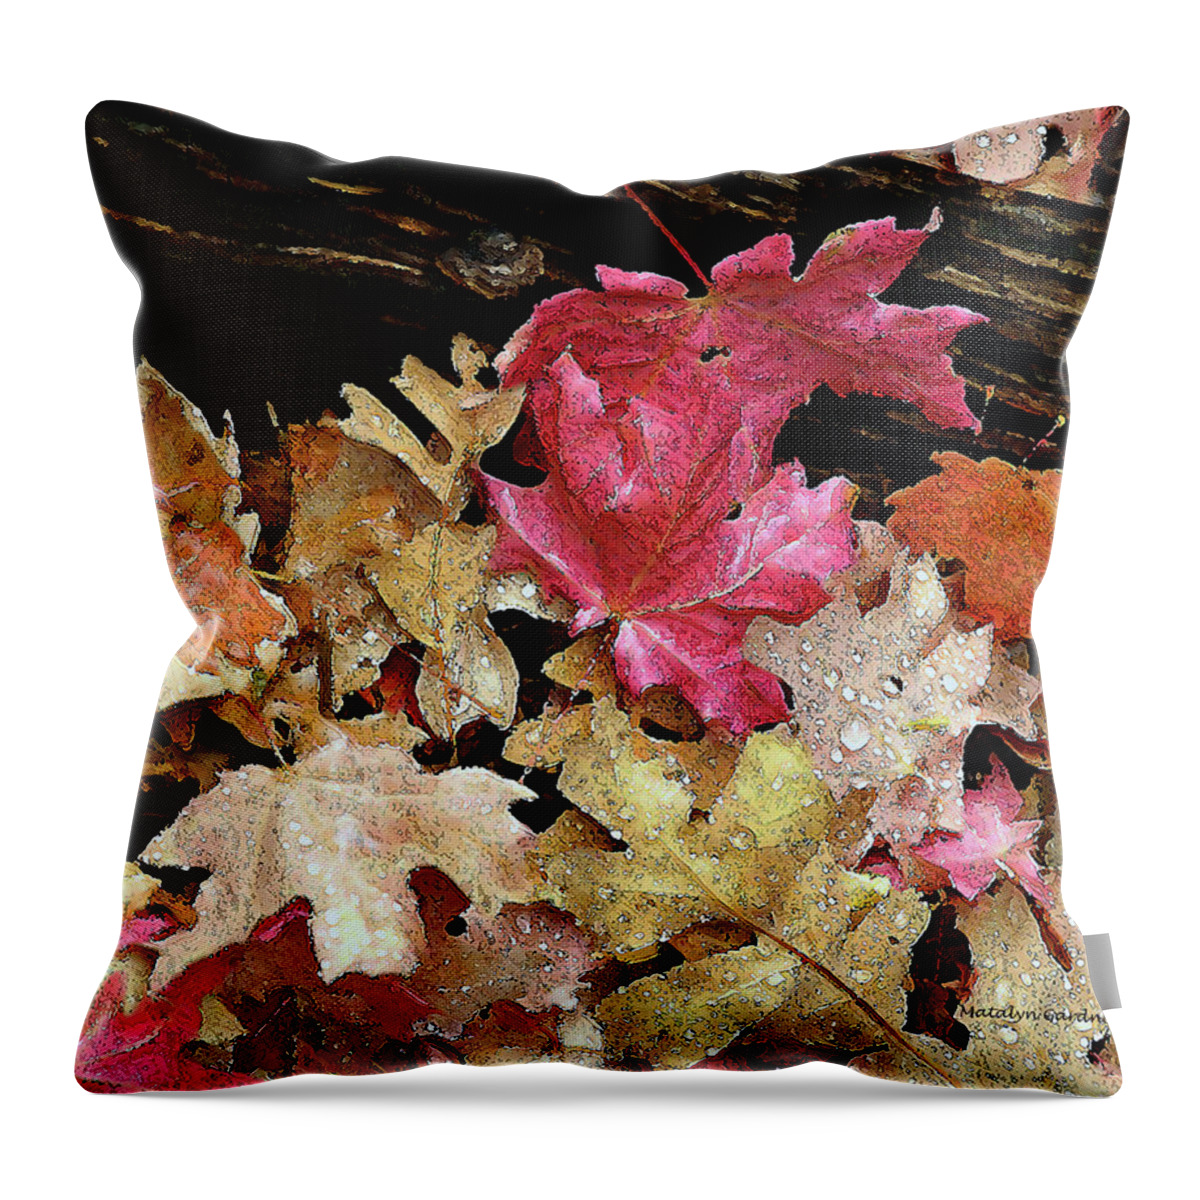 Leaves Throw Pillow featuring the photograph Rainy Day Leaves by Matalyn Gardner